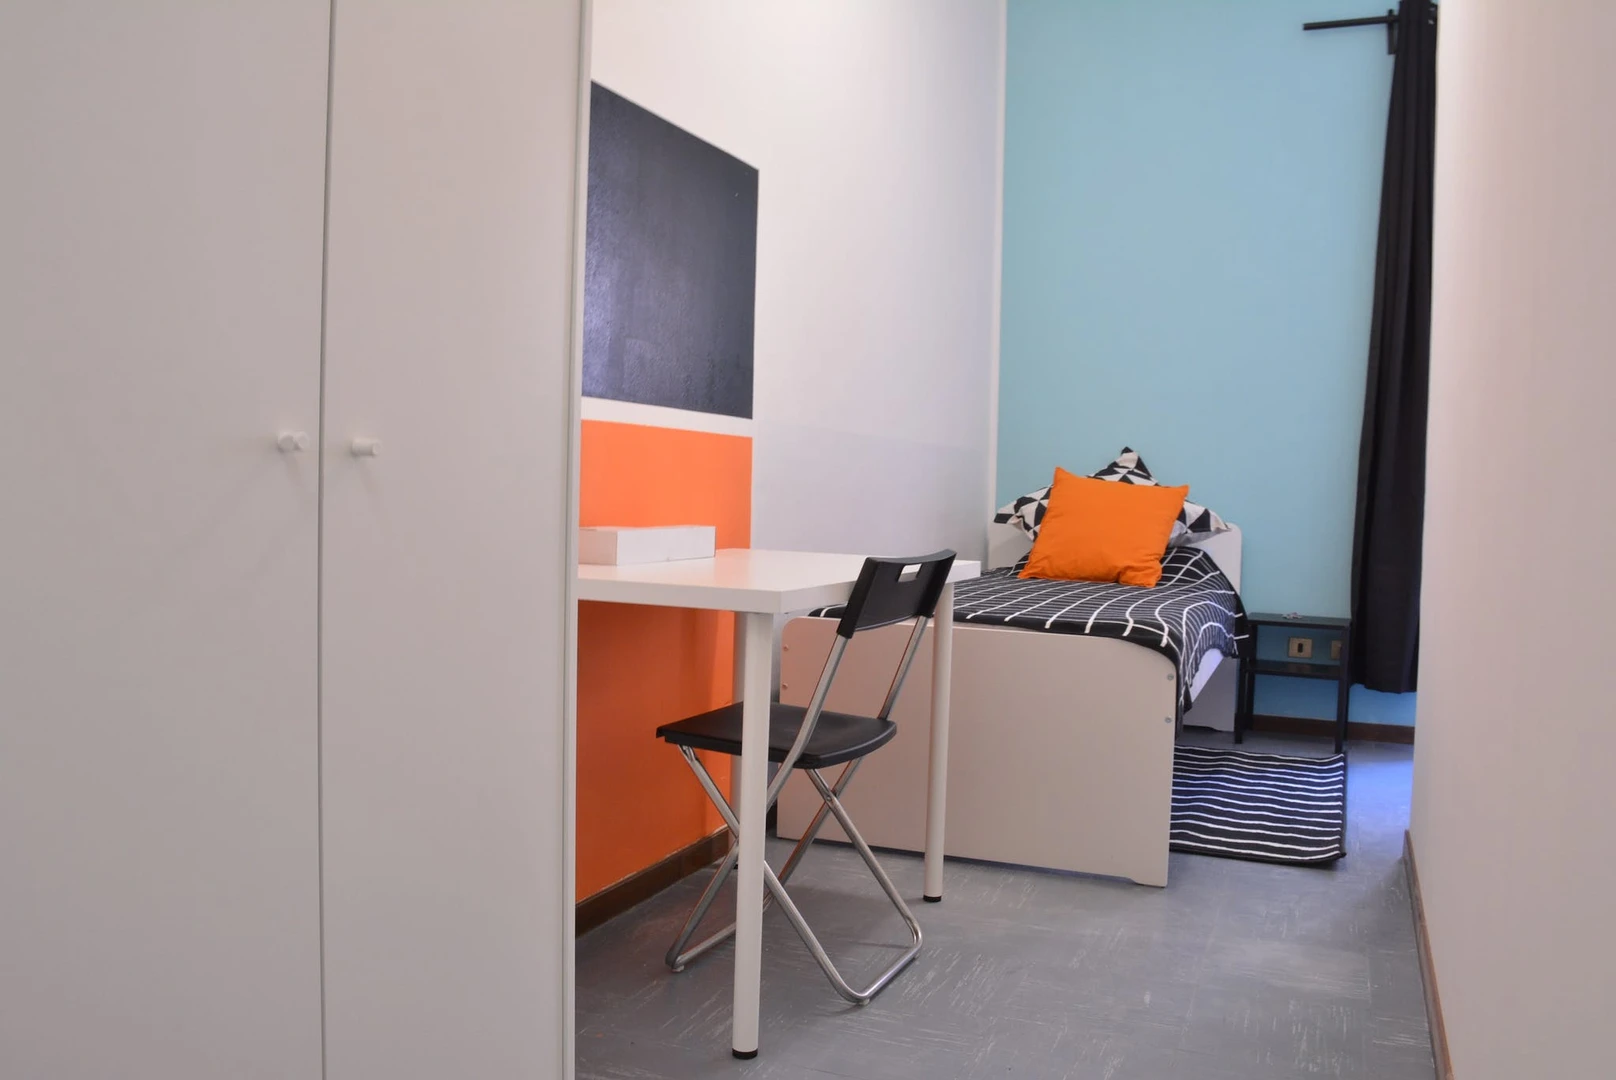 Room for rent with double bed Casteddu/cagliari